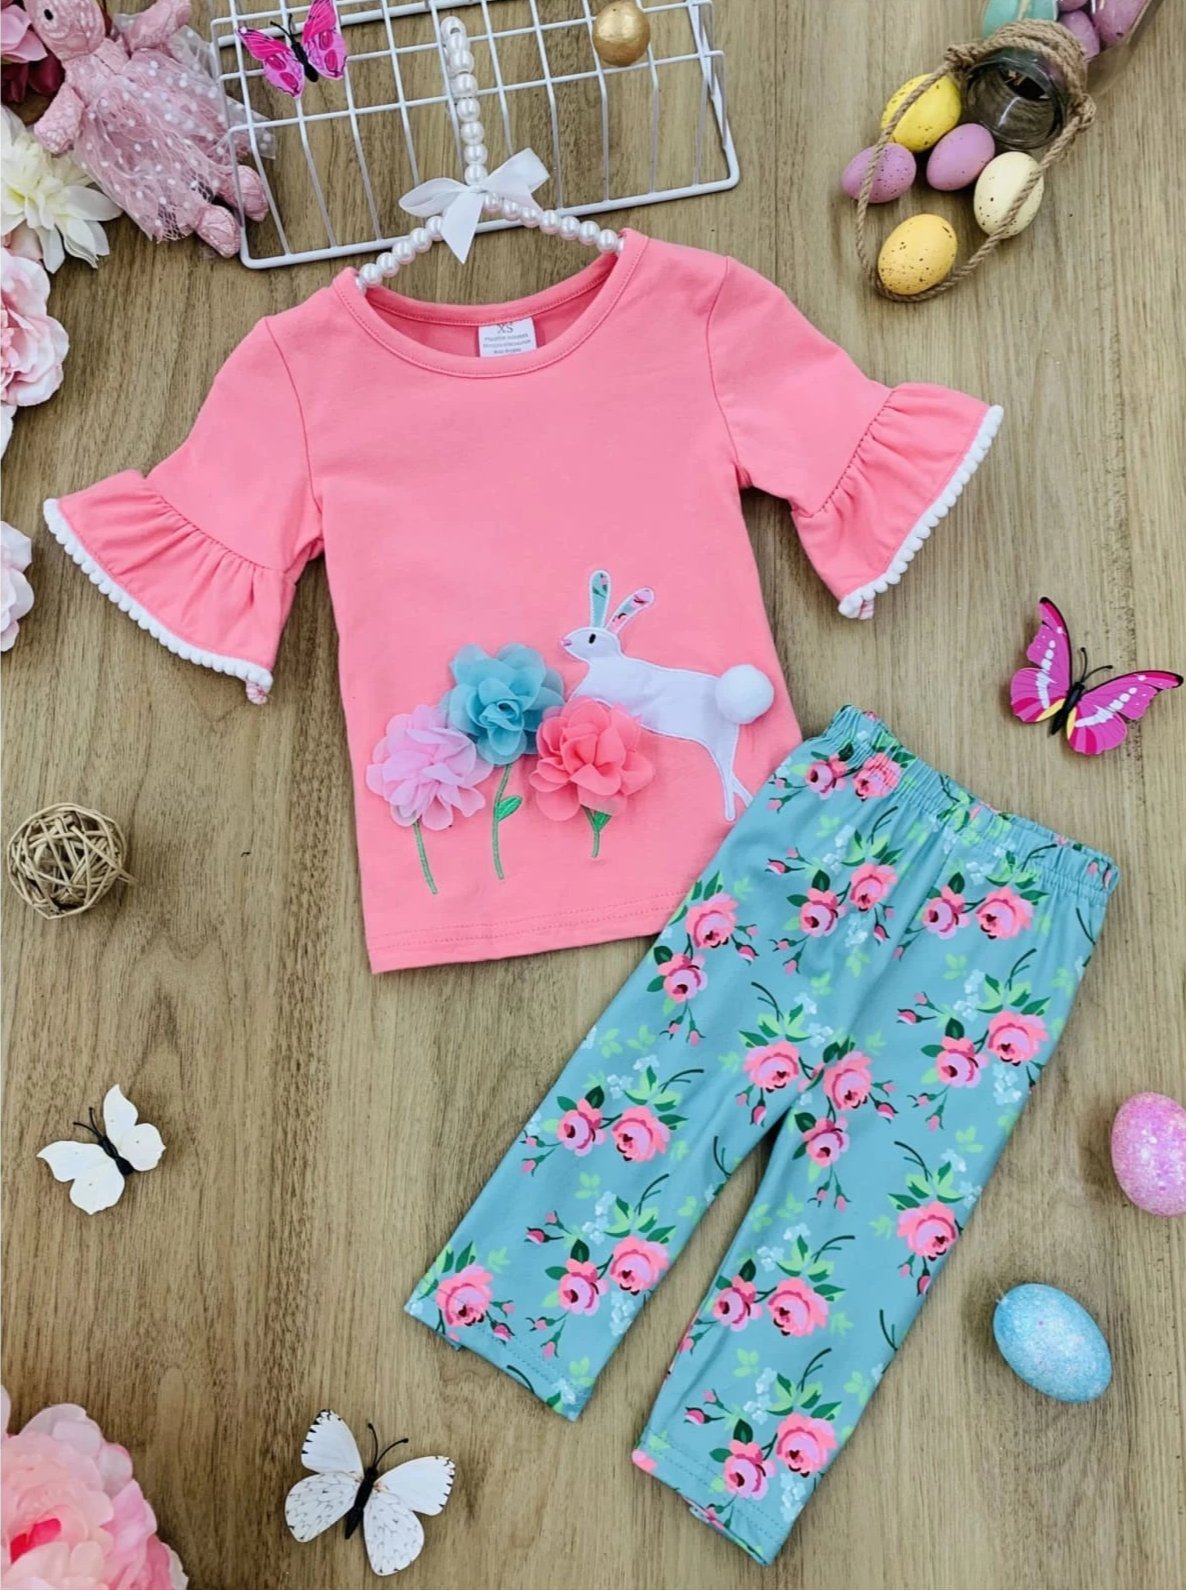 https://cdn.shopify.com/s/files/1/0996/1812/products/girls-ruffled-bunny-mesh-floral-top-and-capri-leggings-set-pink-2t-20-39-99-40-59-2t3t-4t5y-6y6x-spring-casual-mia-belle-baby-605.jpg